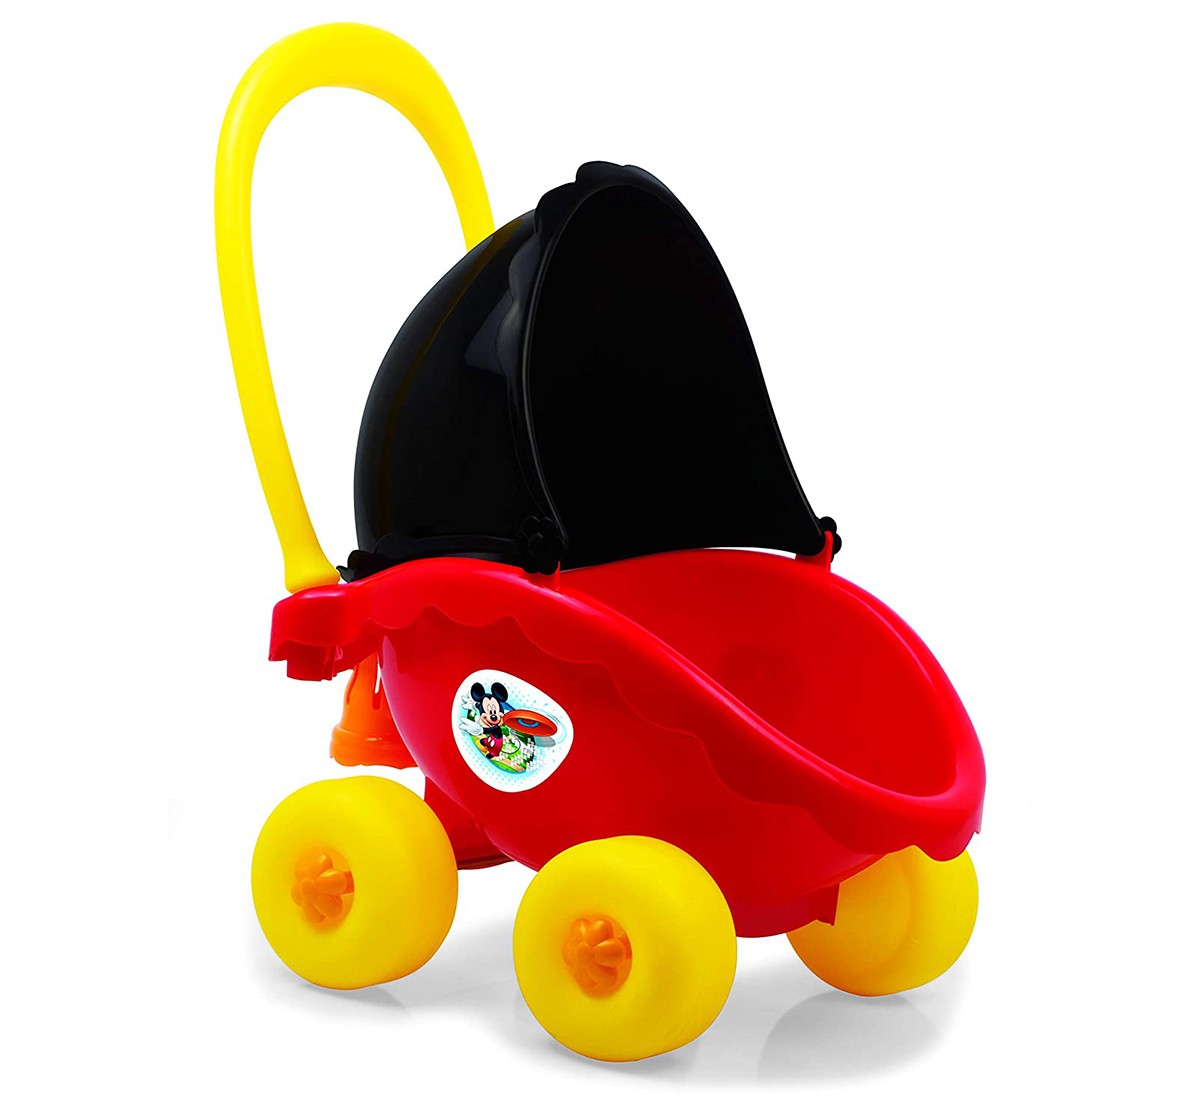 Giggles Mickey My First Buggy Activity Toys for Kids age 18M + (Red)